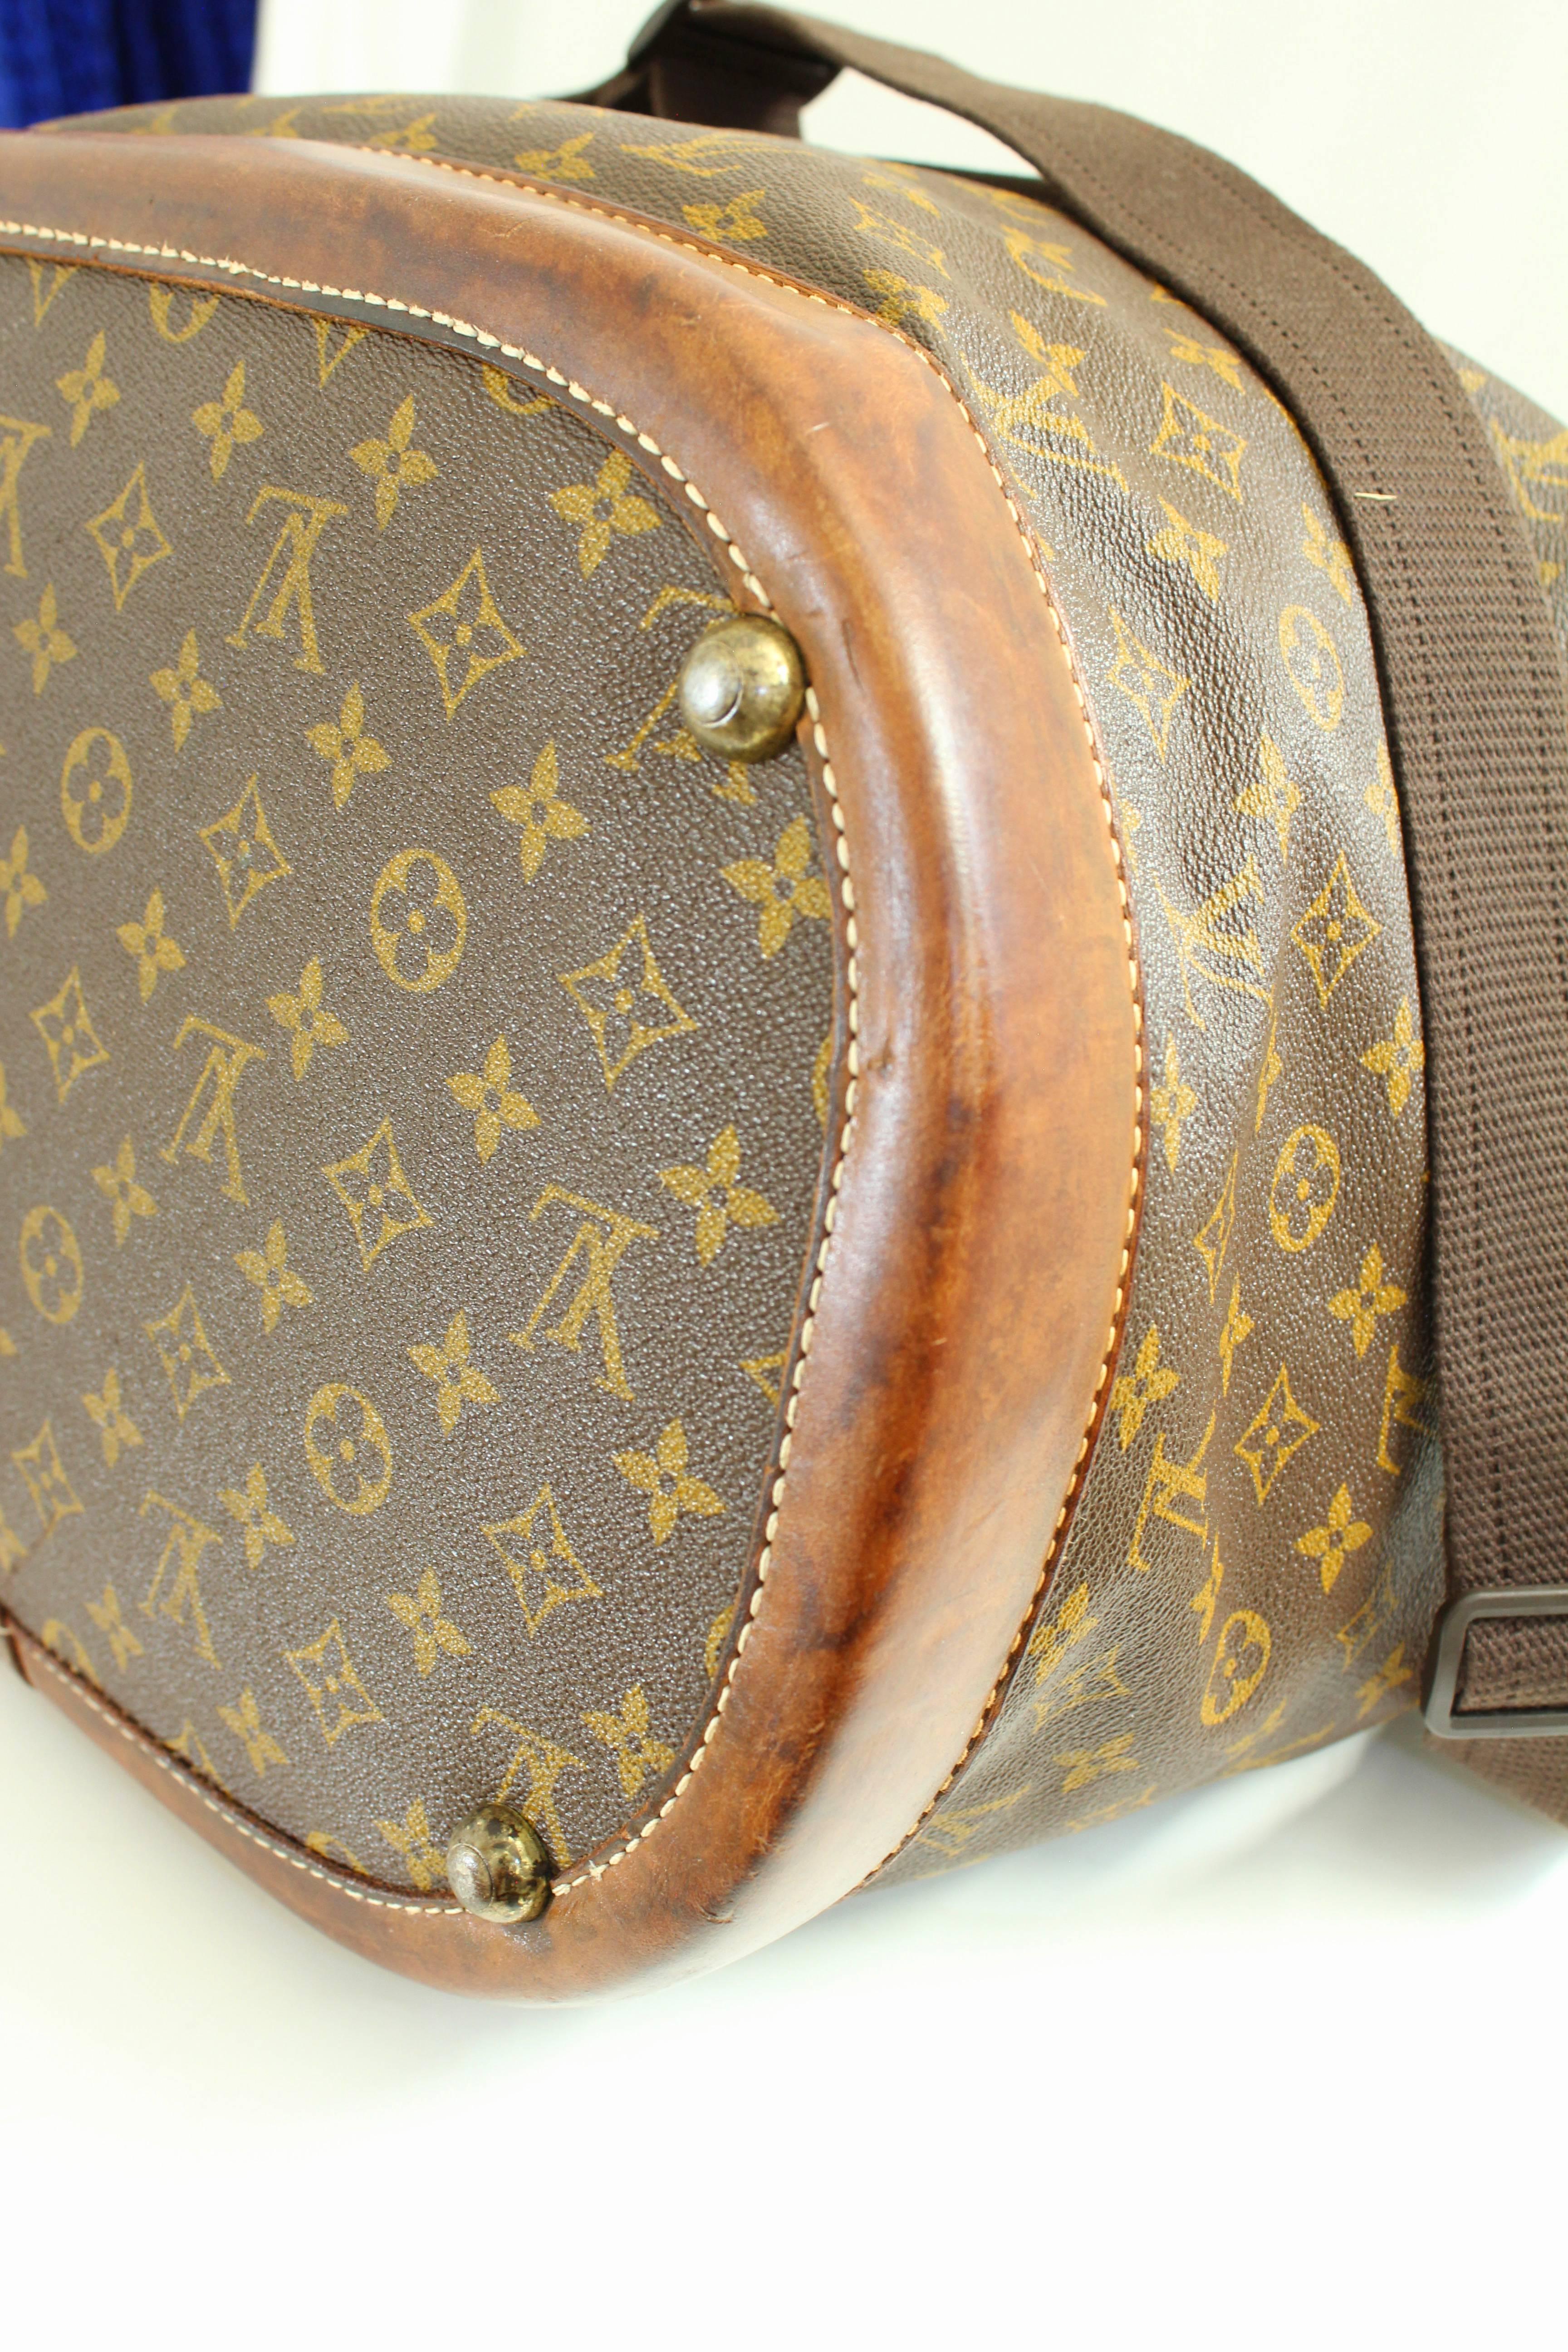 Louis Vuitton Large Steamer Bag Keepall Monogram Travel Tote French Company 70s  1